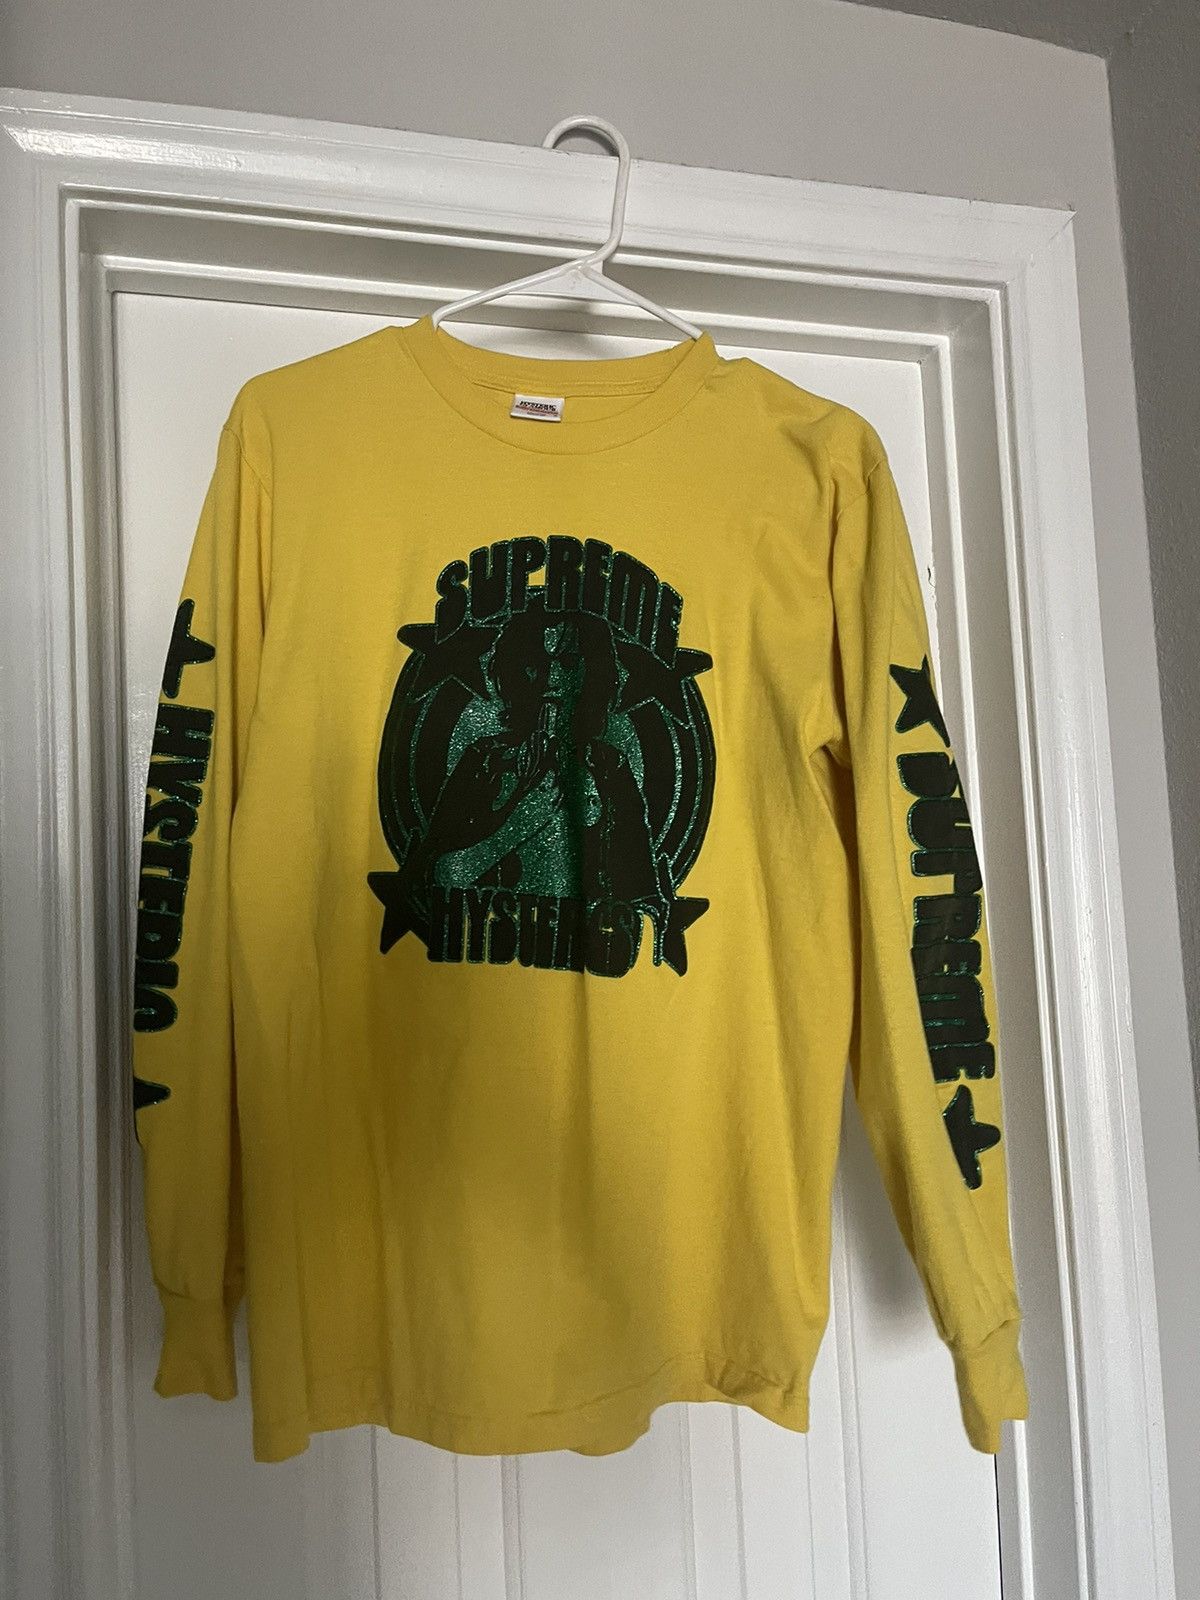 Supreme Supreme Hysteric Glamour L/S Tee “Yellow” | Grailed